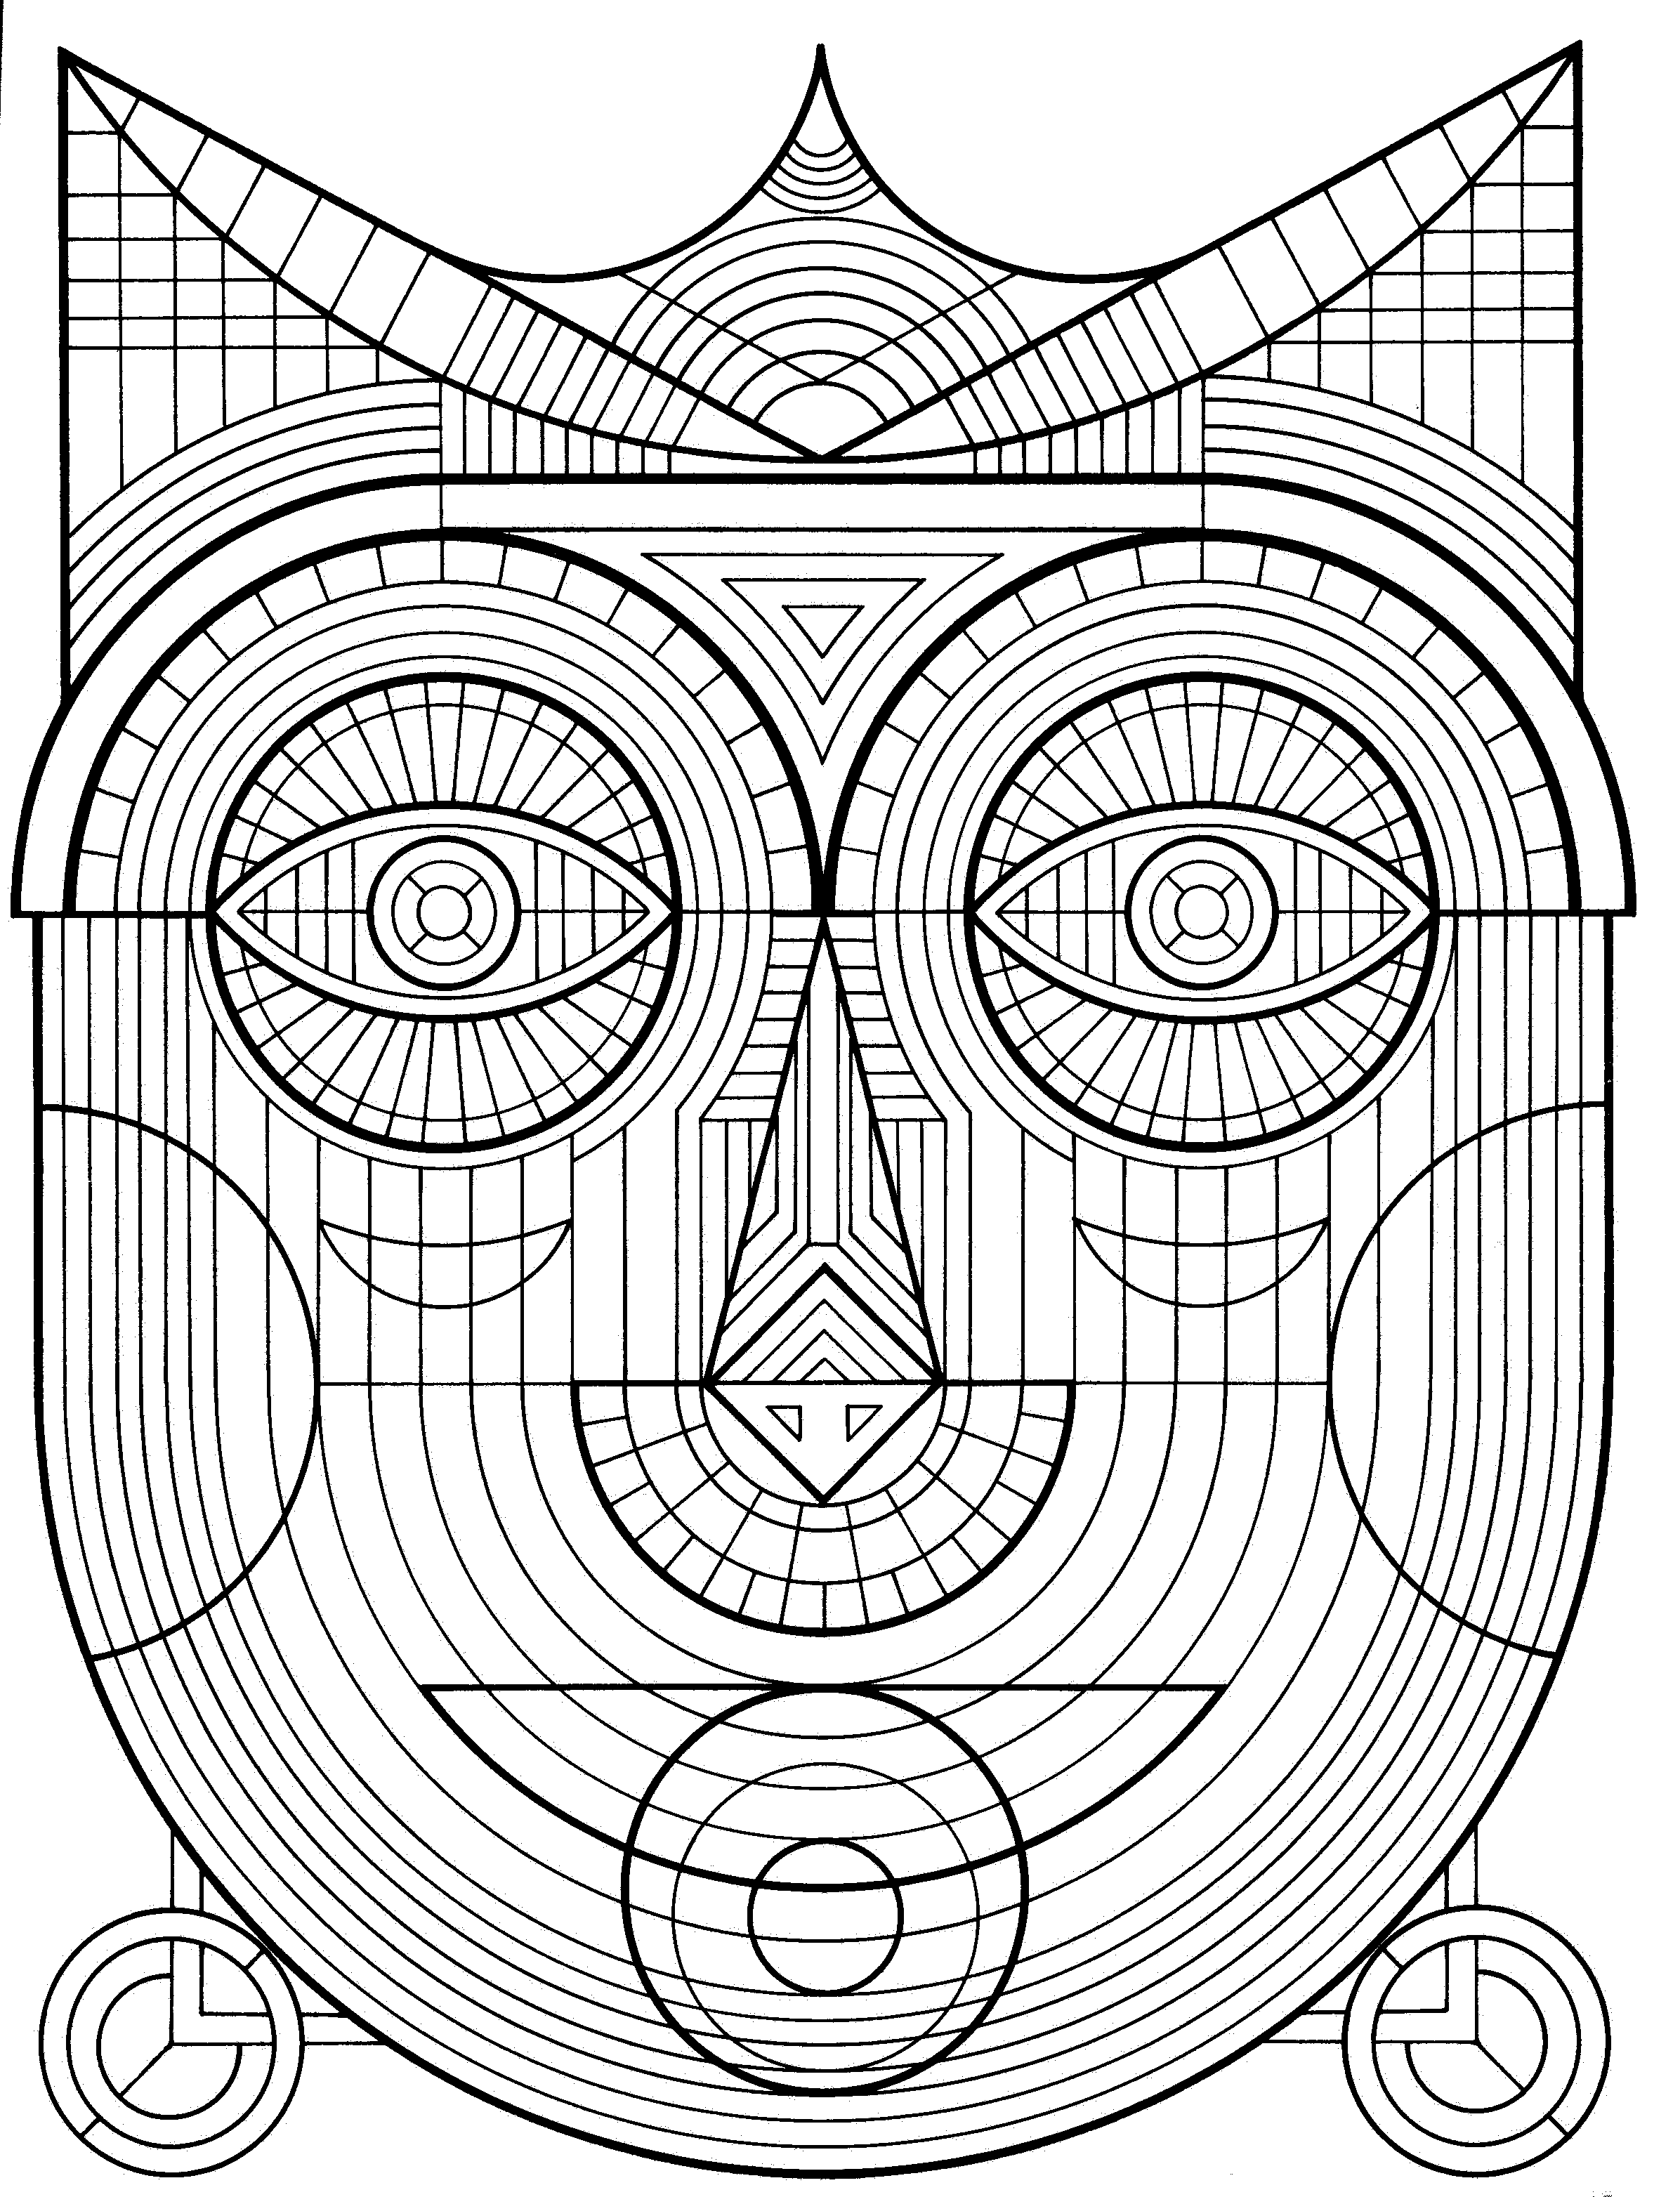 Geometry - Coloring Pages for Kids and for Adults